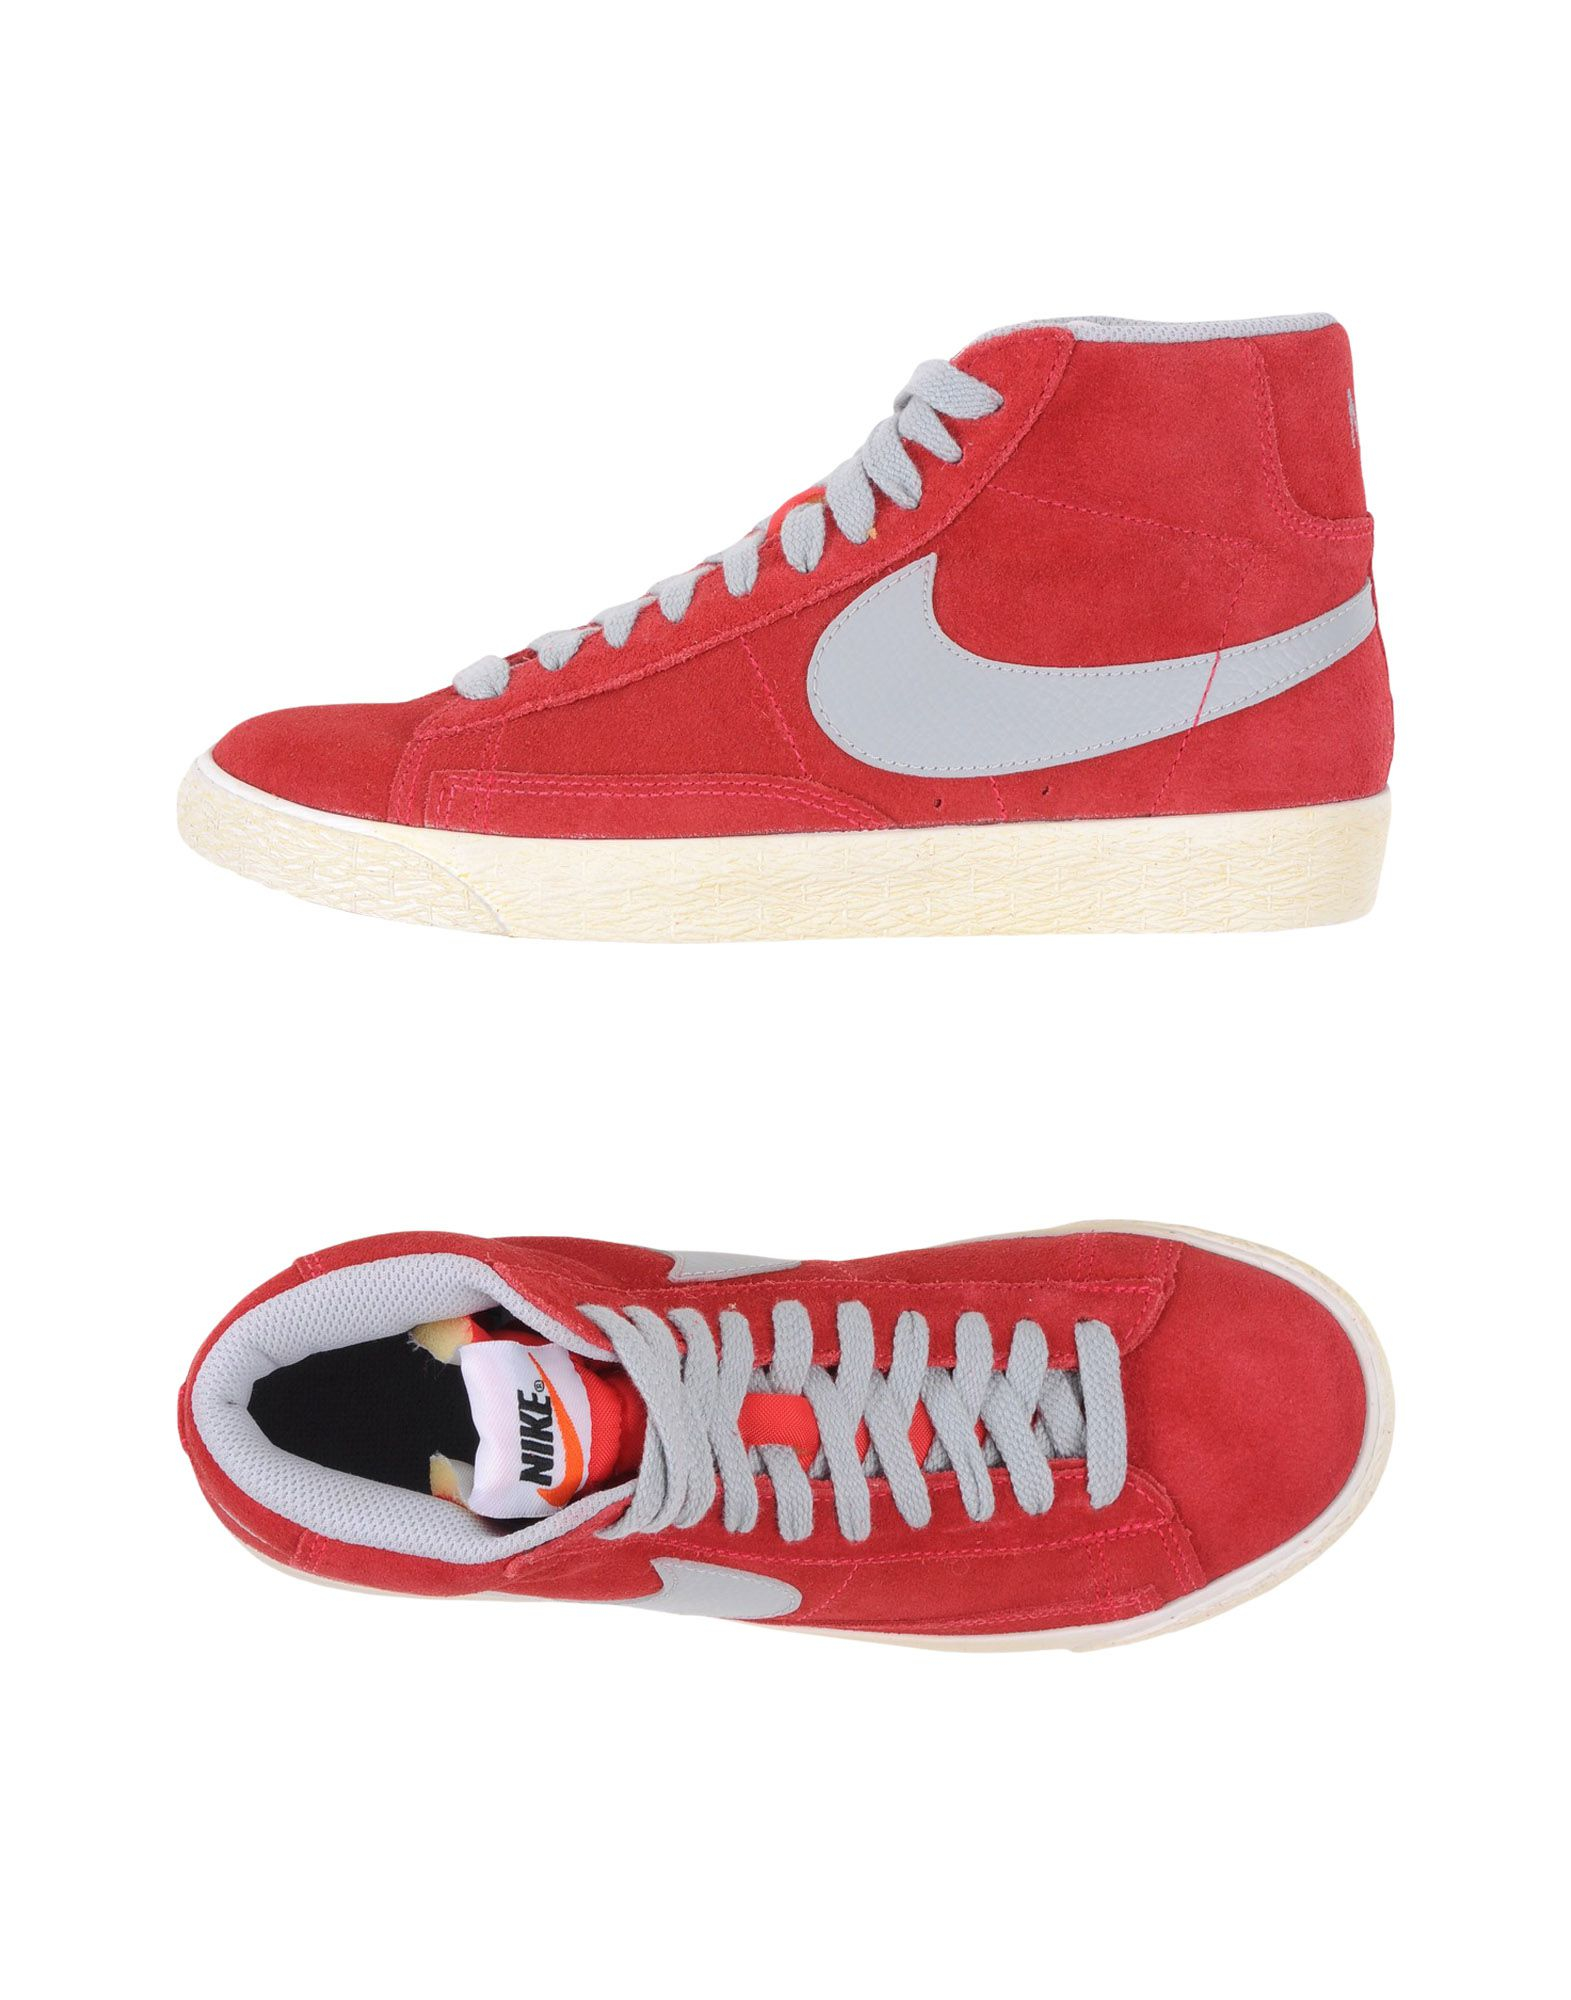 Nike Leather High-tops & Sneakers in Red for Men - Lyst